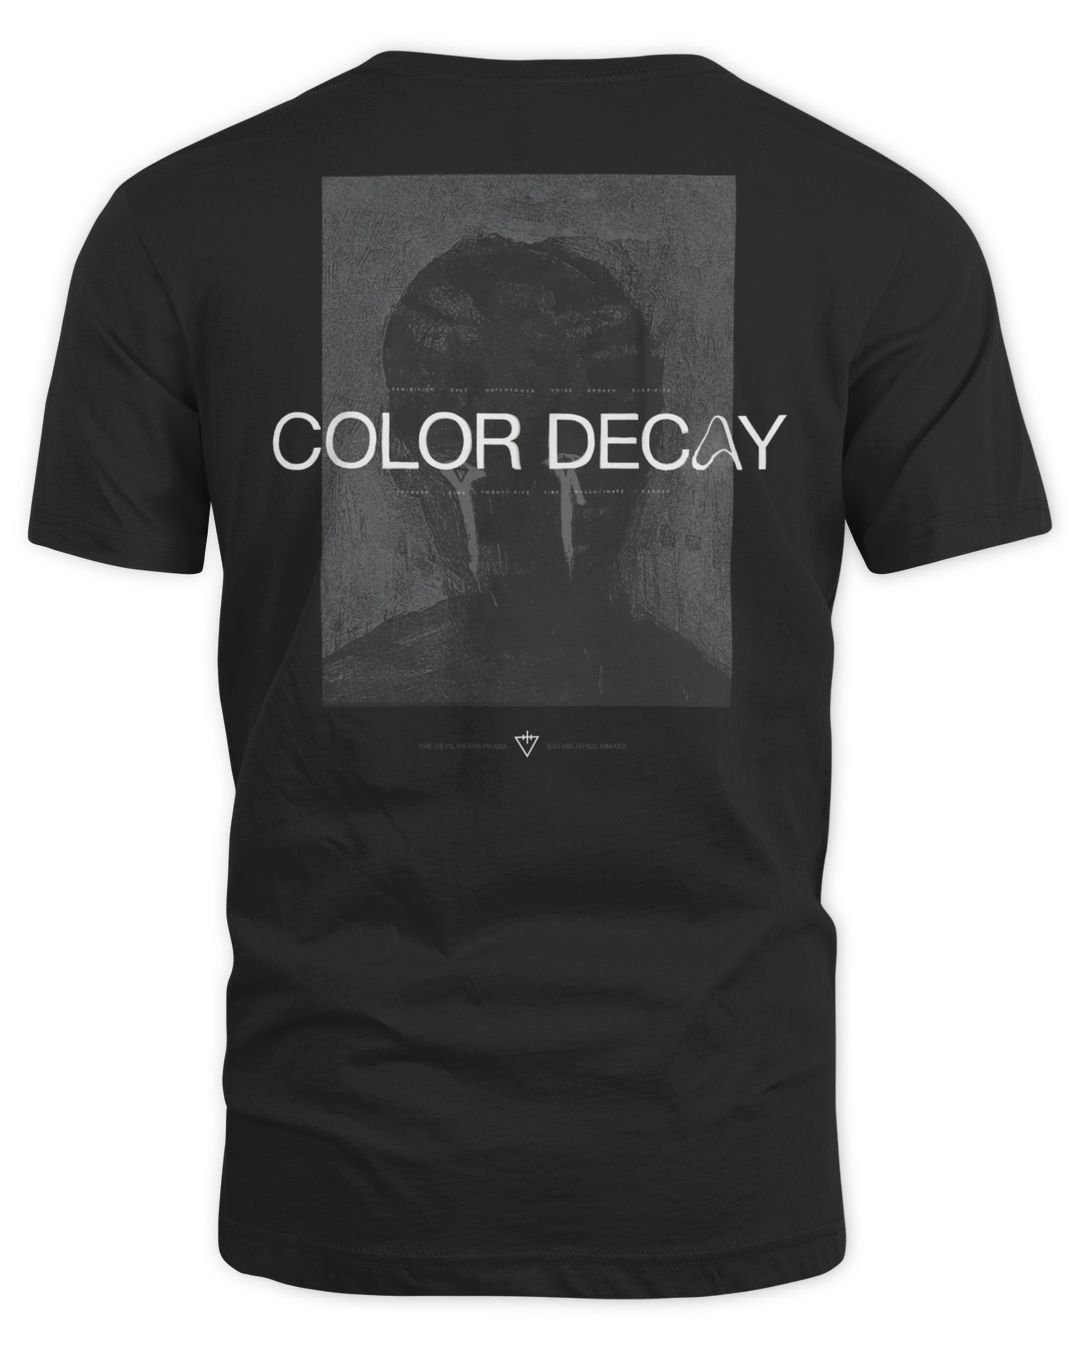 The Devil Wears Prada Band Merch Color Decay T-Shirt